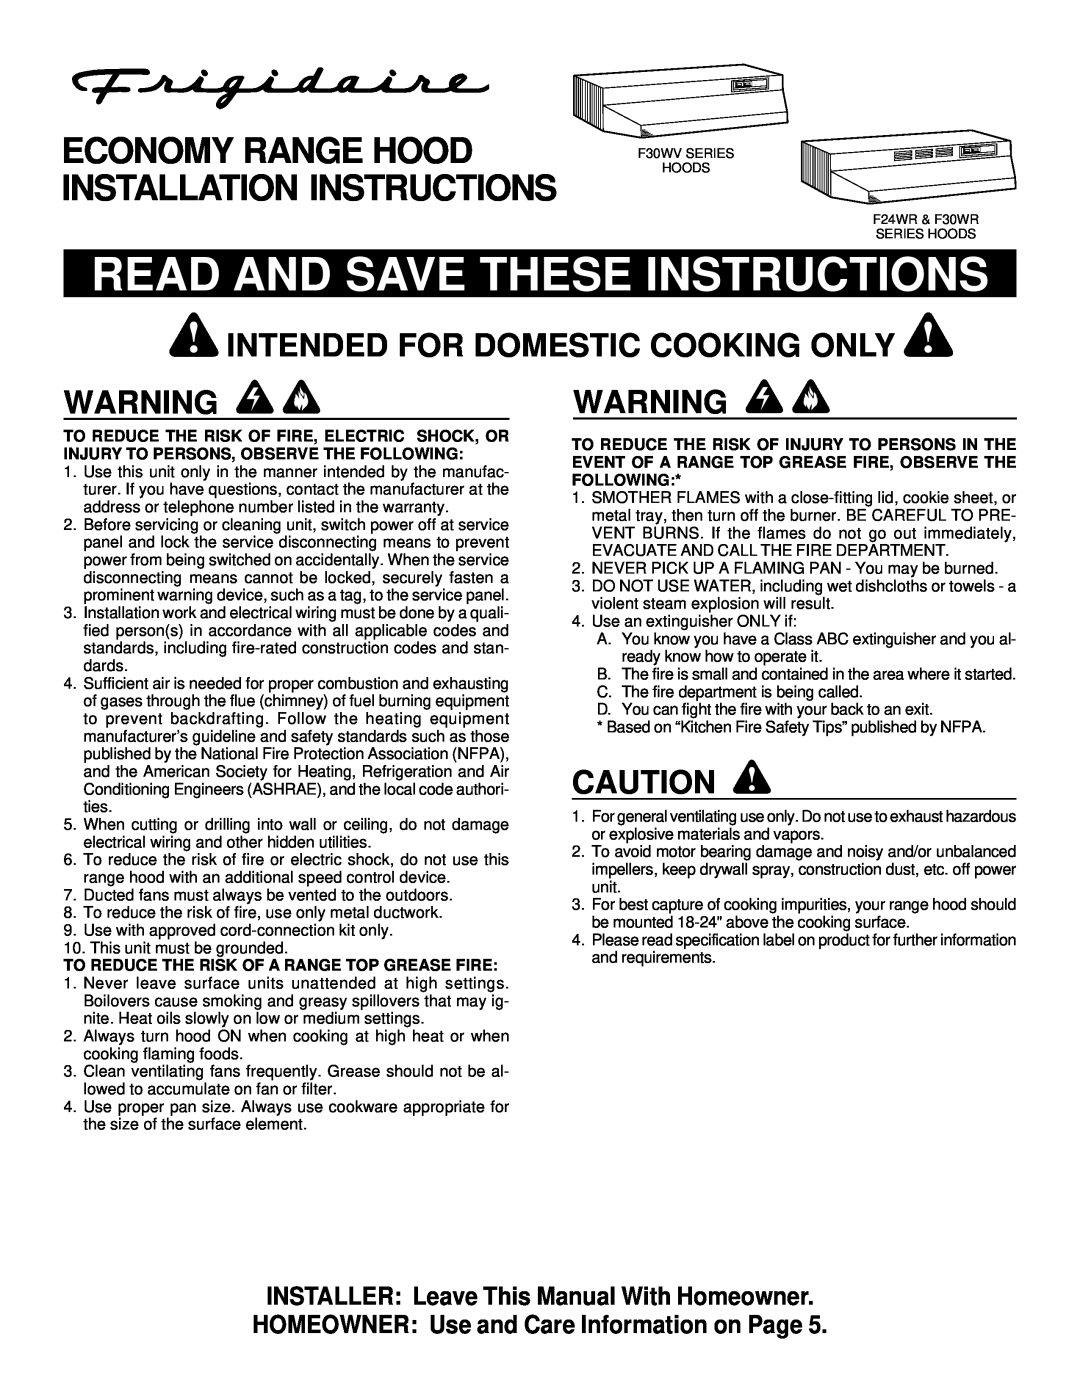 Frigidaire F30WV, F24WR installation instructions Intended For Domestic Cooking Only, Read And Save These Instructions 